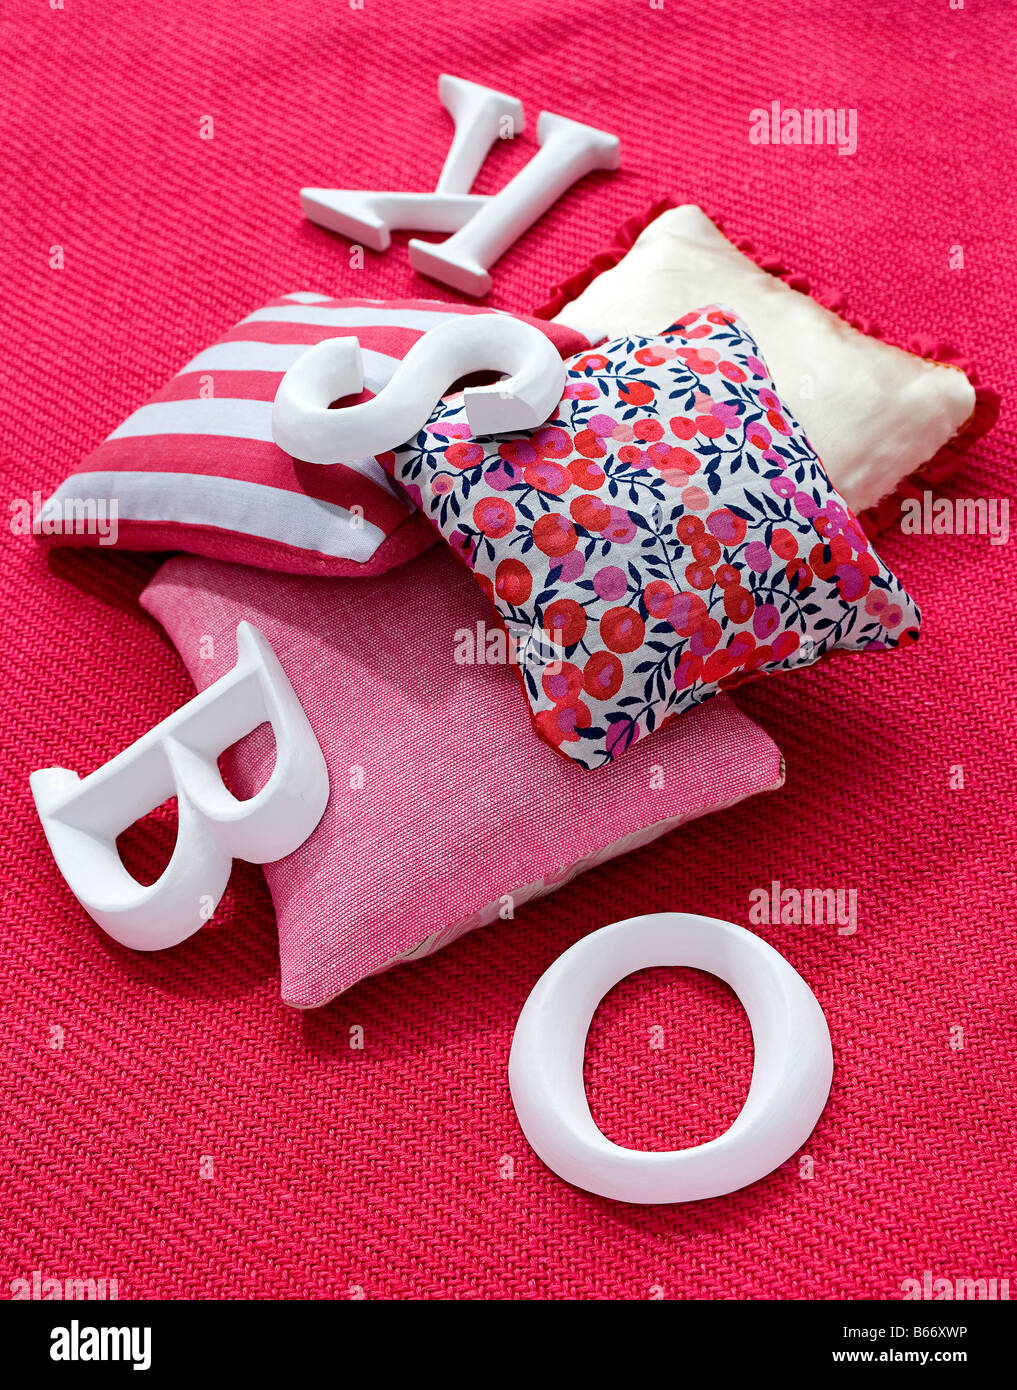 Cushions and letters on a carpet Stock Photo